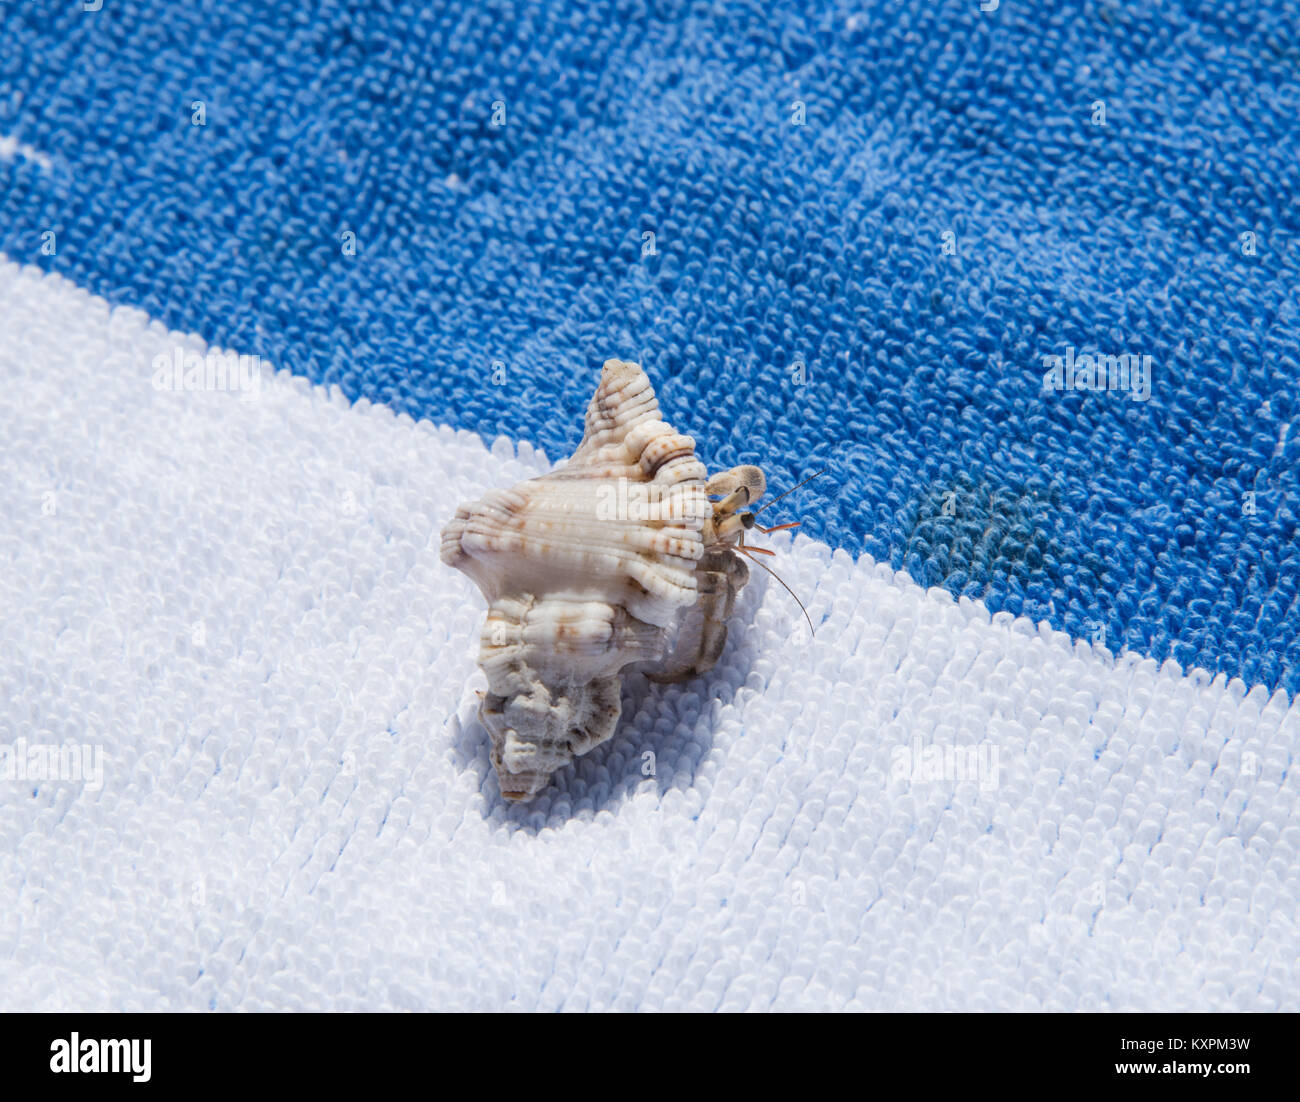 Hermit crab crawling on blue and white stripe towel. Stock Photo